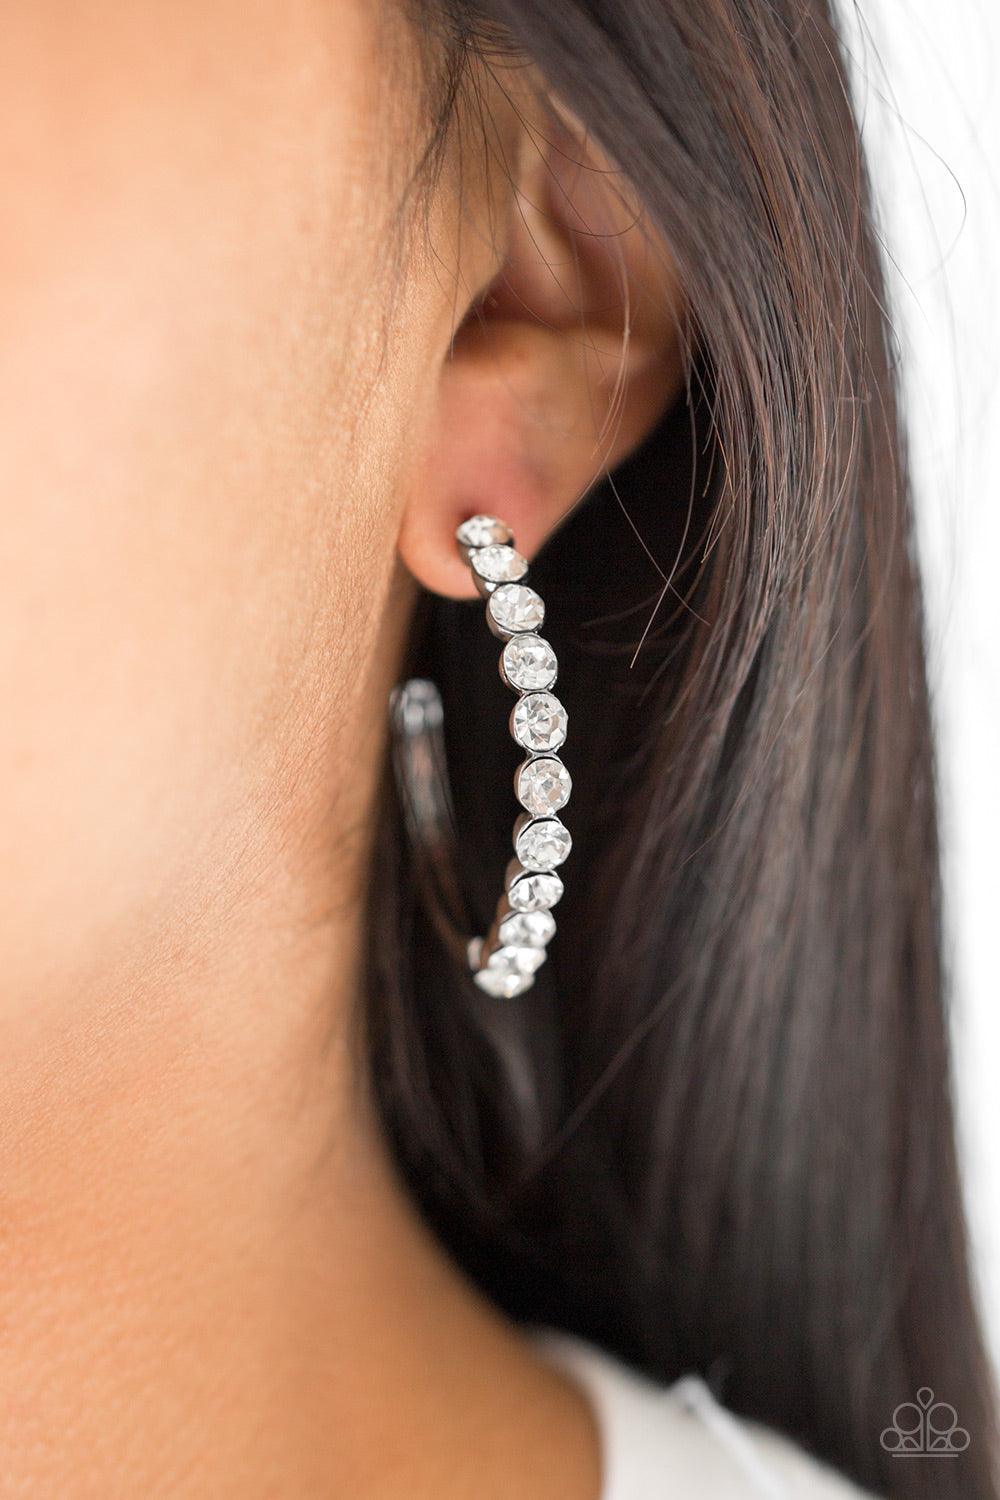 Paparazzi Accessories-My Kind Of Shine - Black Earrings